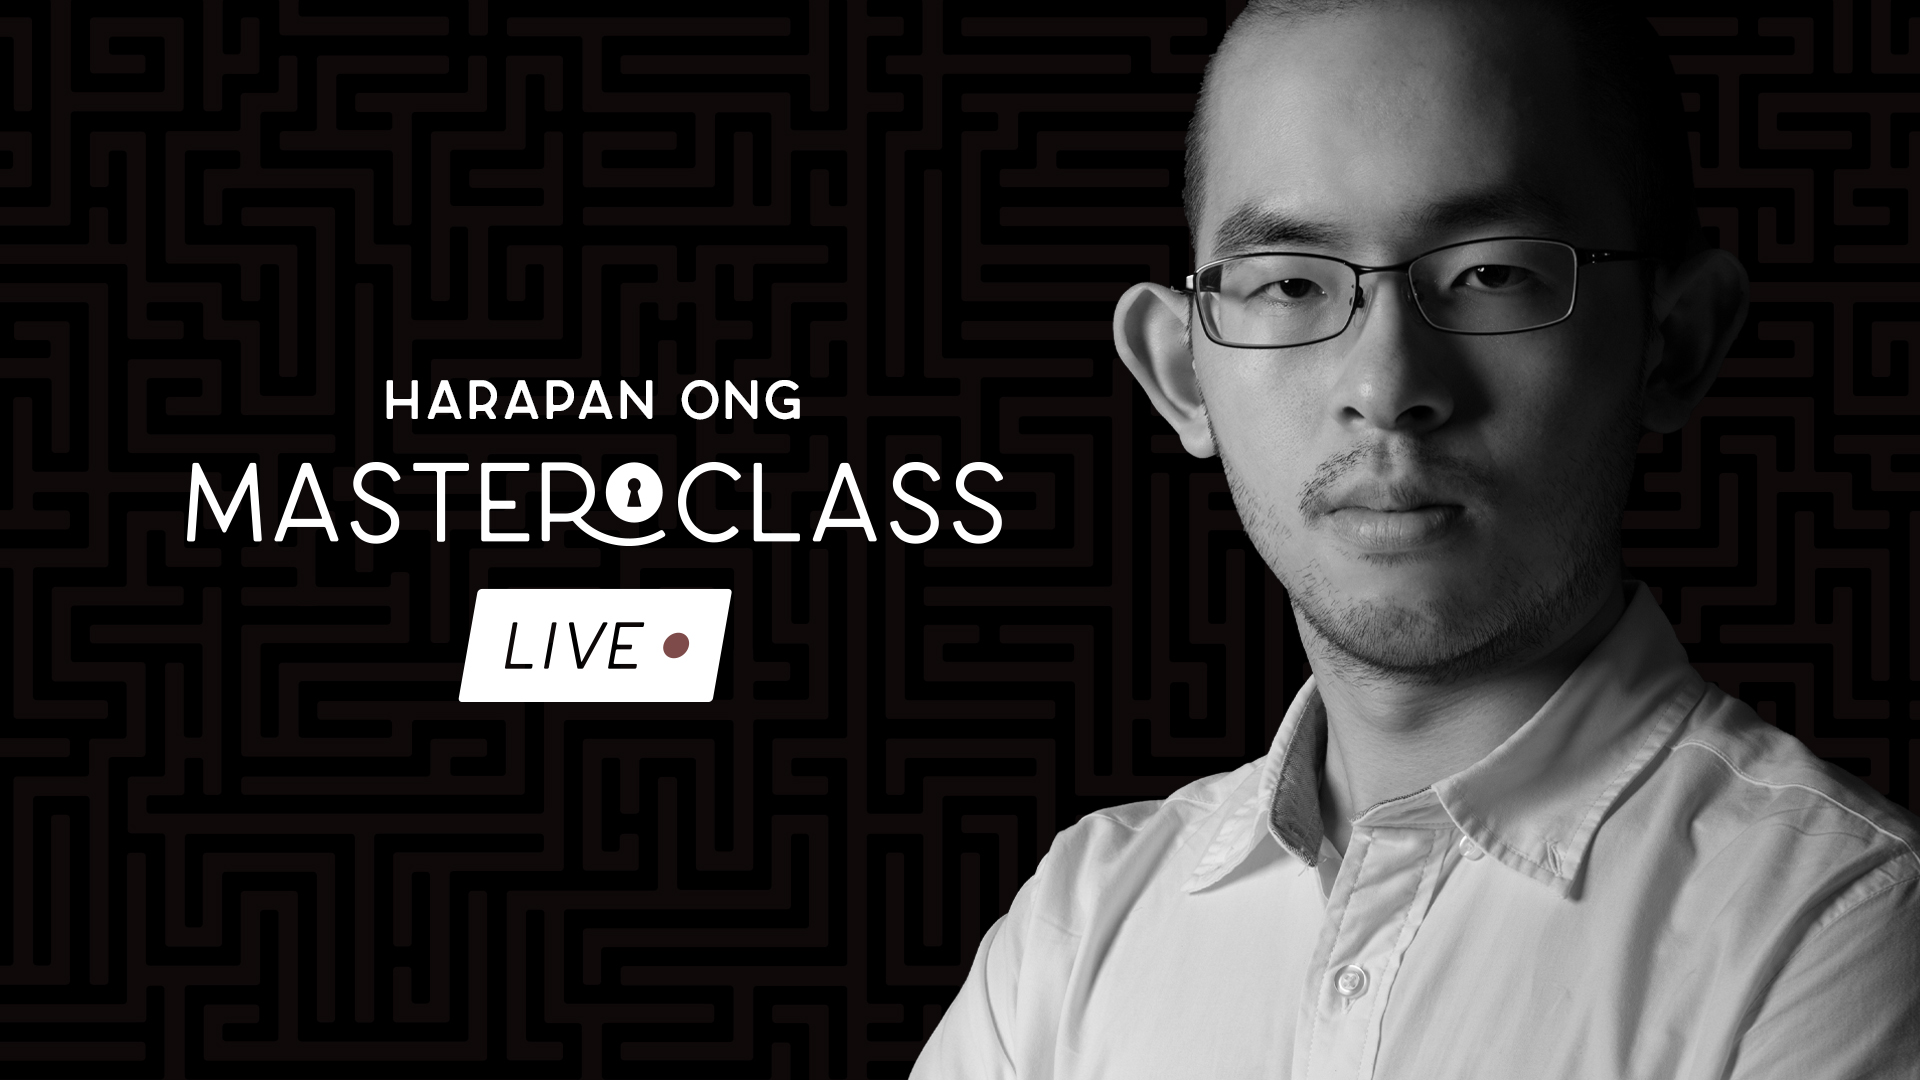 Harapan Ong - Masterclass Live Lecture (Week 1-3) (MP4 Videos Download)